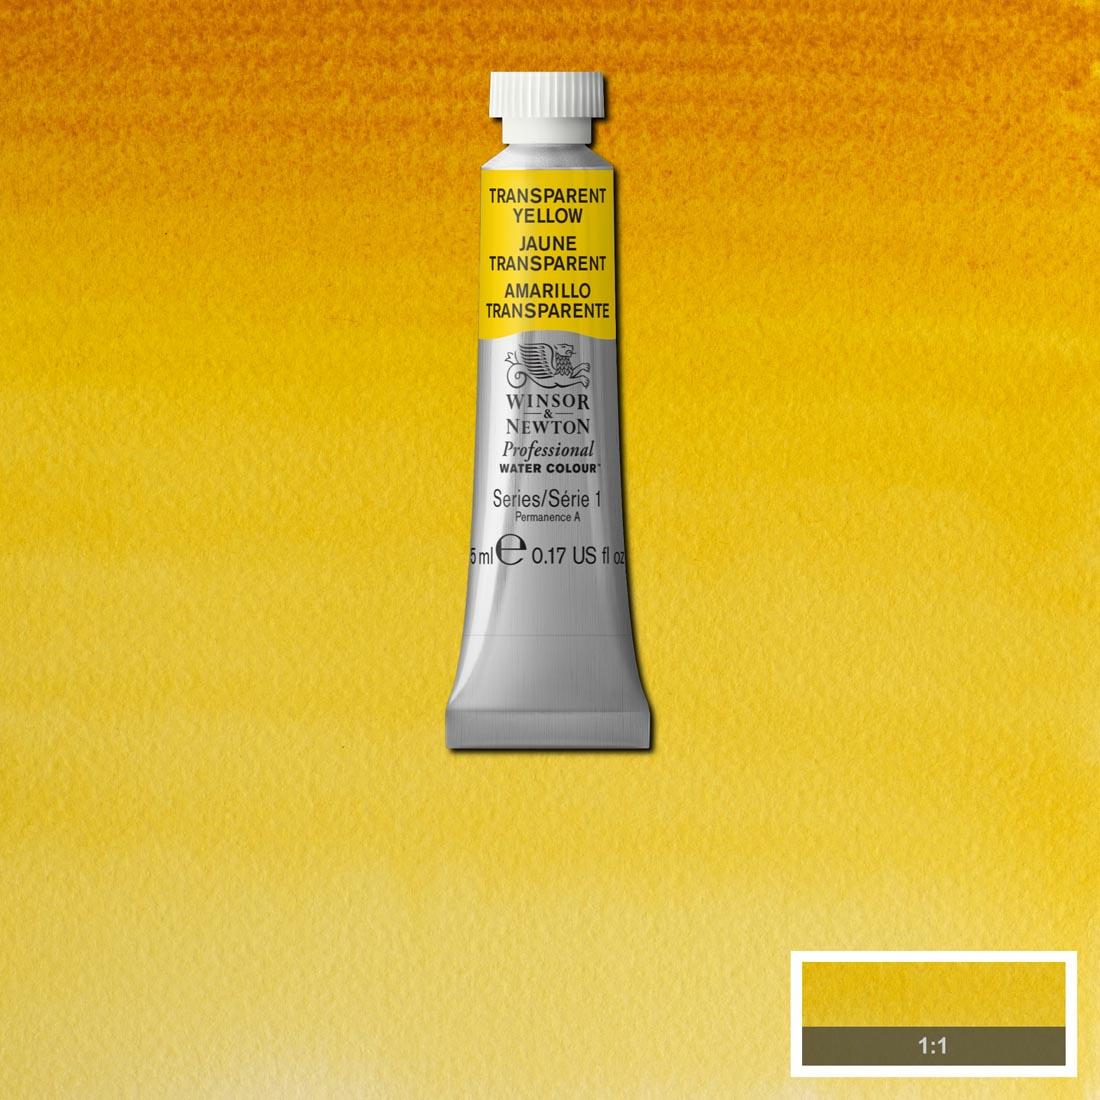 Tube of Transparent Yellow Winsor & Newton Professional Water Colour with a paint swatch for the background